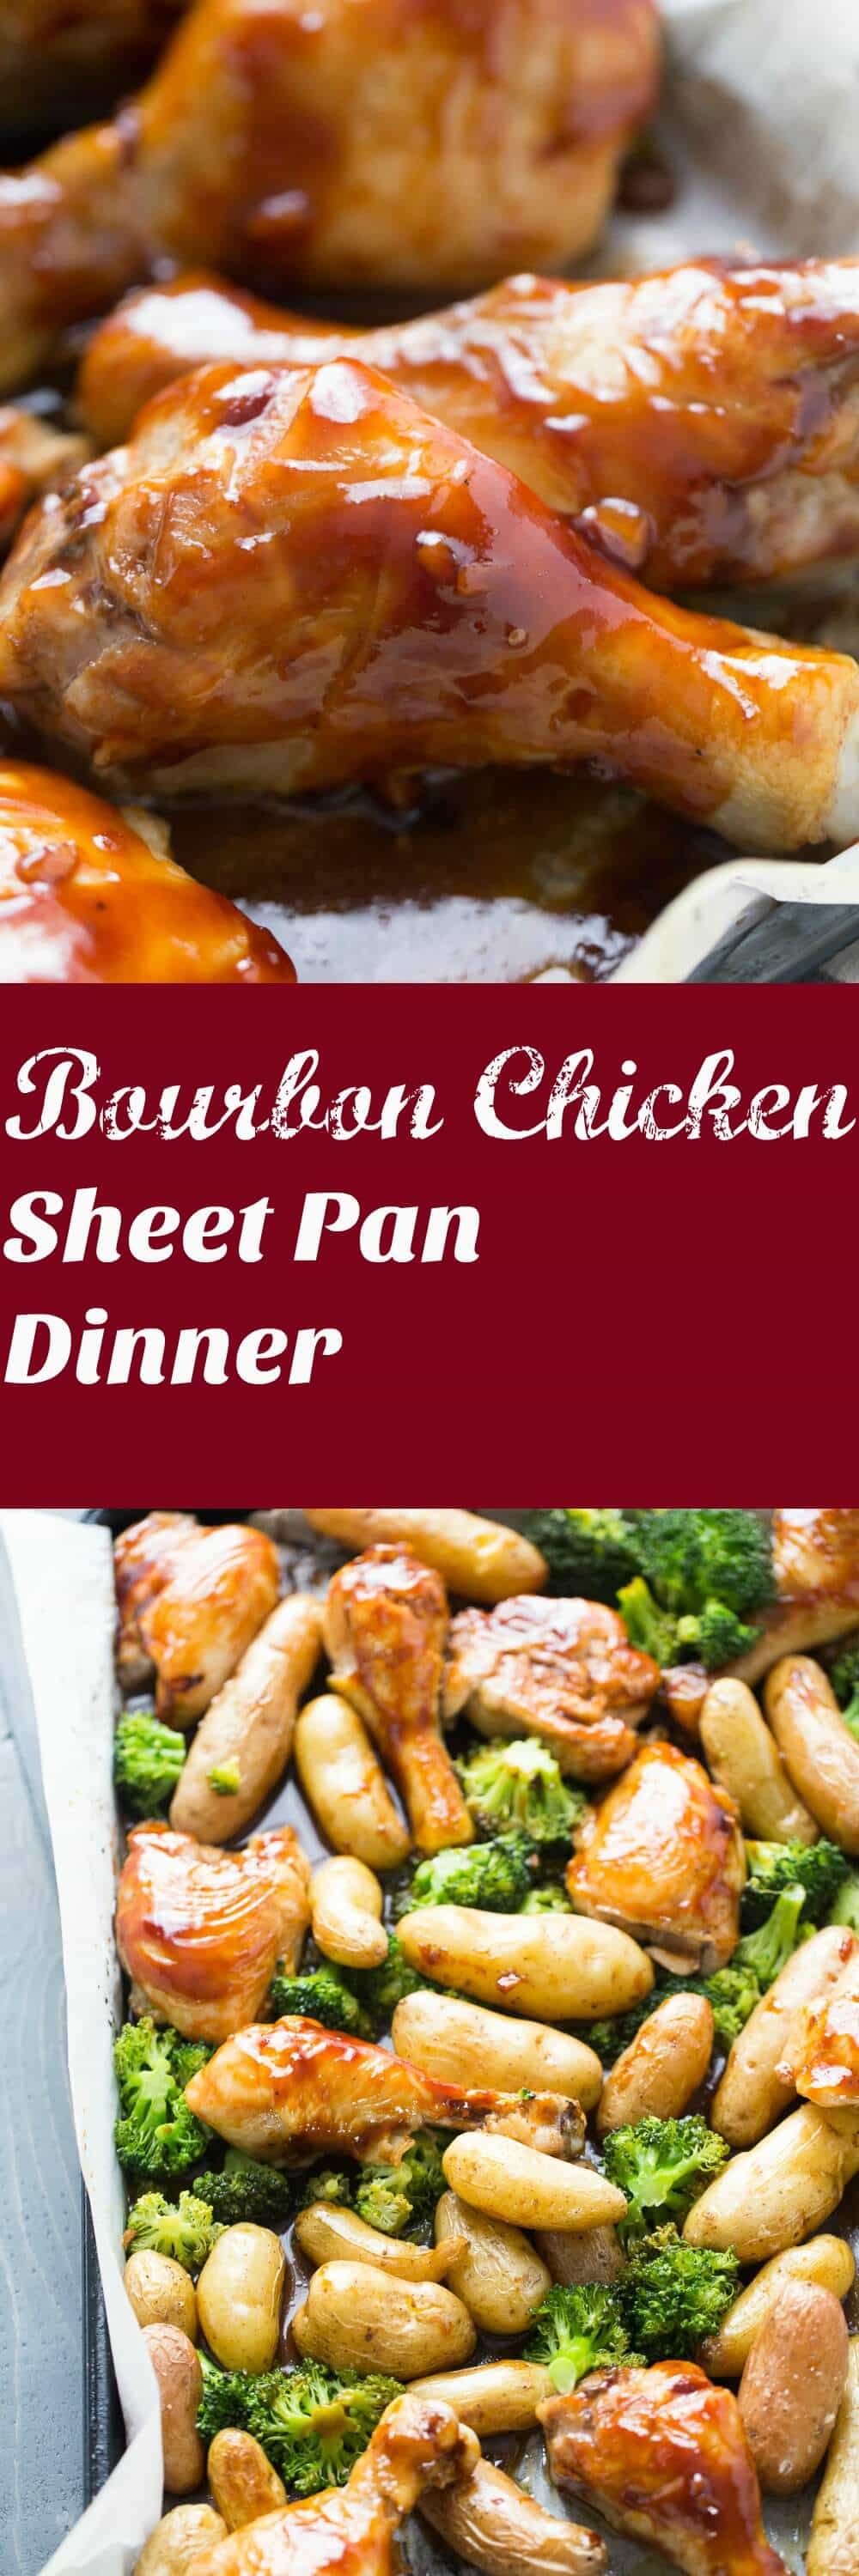 Sheet pan dinners are family friendly and easy to make! This bourbon chicken recipe is baked along with potatoes and broccoli then covered in a perfectly seasoned bourbon sauce! Get the napkins ready! lemonsforlulu.com